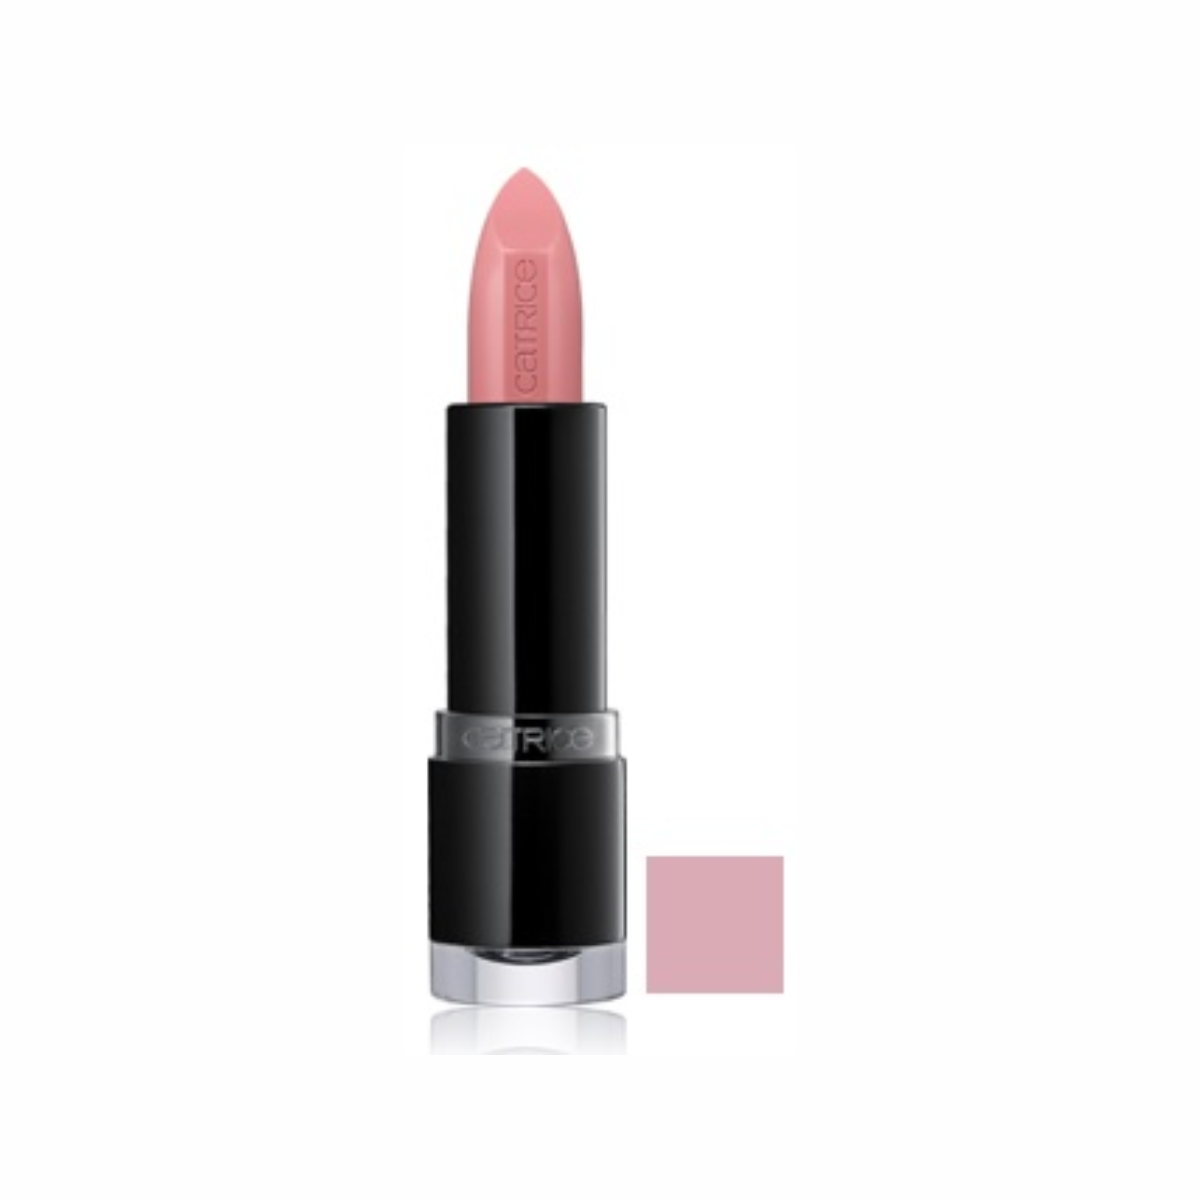 CATRICE ULTIMATE COLLECTION LIP COLOUR - 240 OUTLET